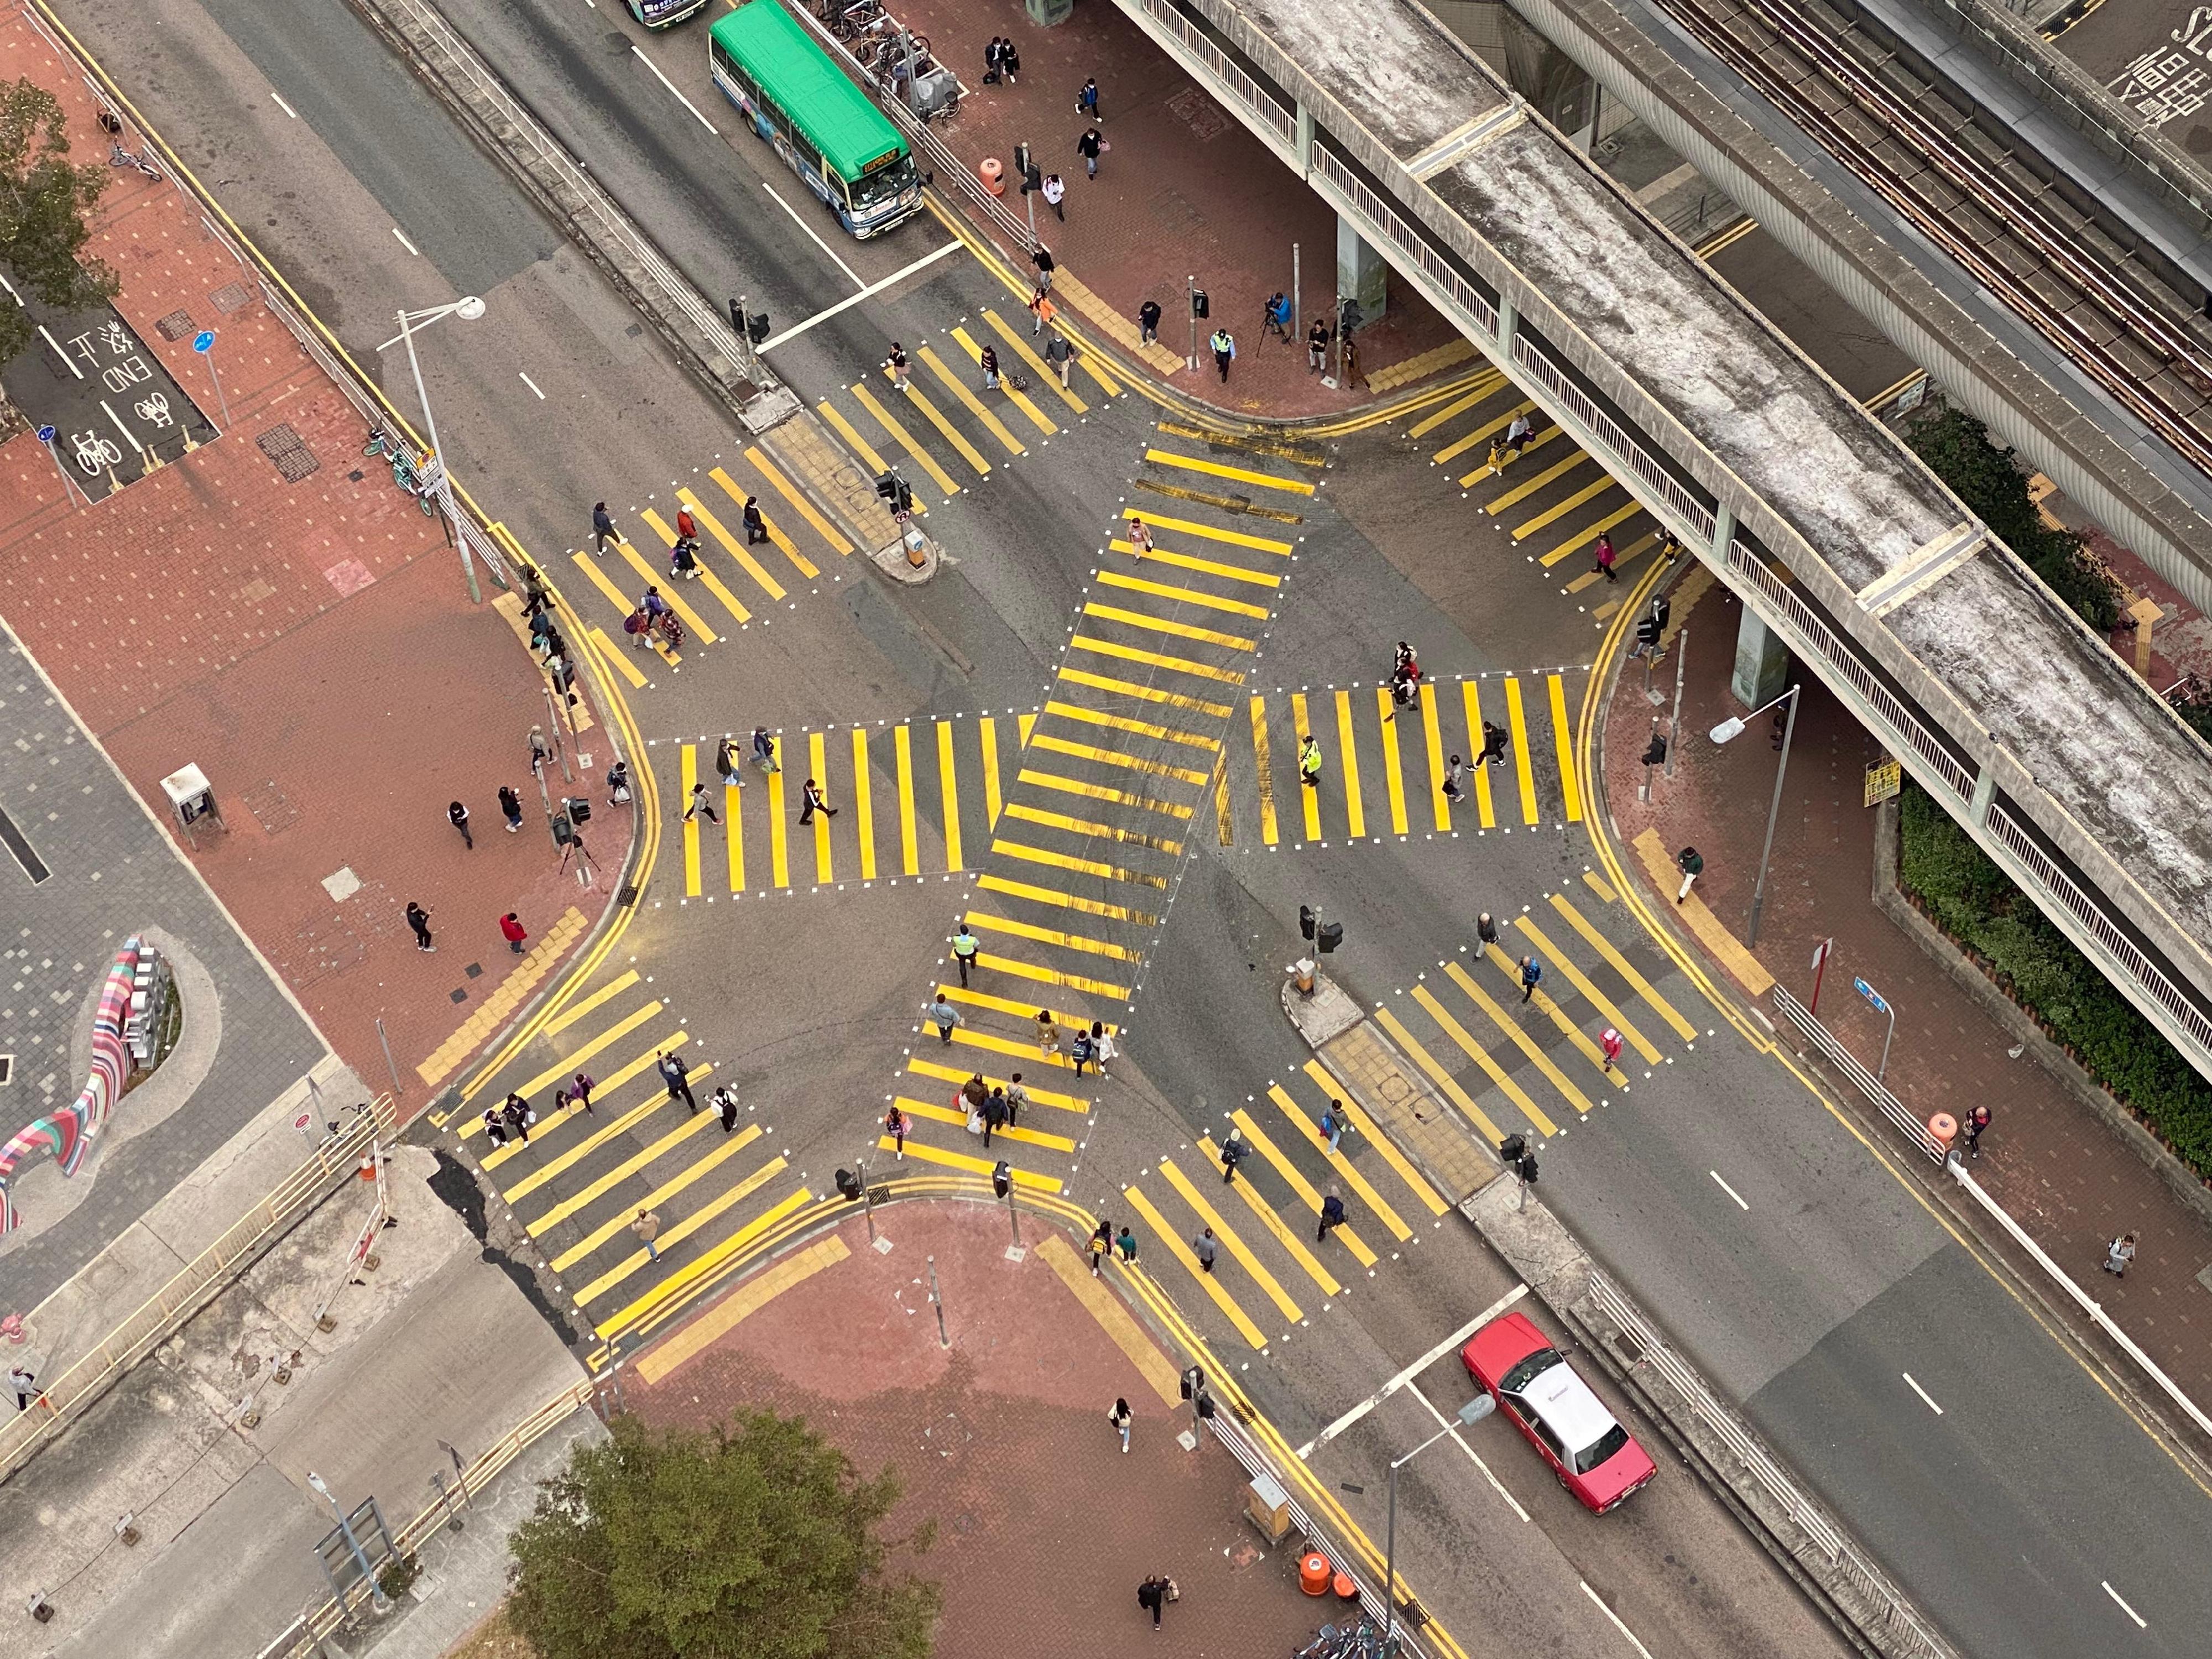 The Transport Department announced that the works for diagonal crossings at the junction of Sha Kok Street and Yat Tai Street in Sha Tin have been completed and that the crossings are open for use today (January 31). Diagonal crossings allow pedestrians to walk directly to a diagonal corner via the centre of the junction, thus reducing the walking distance and saving time.